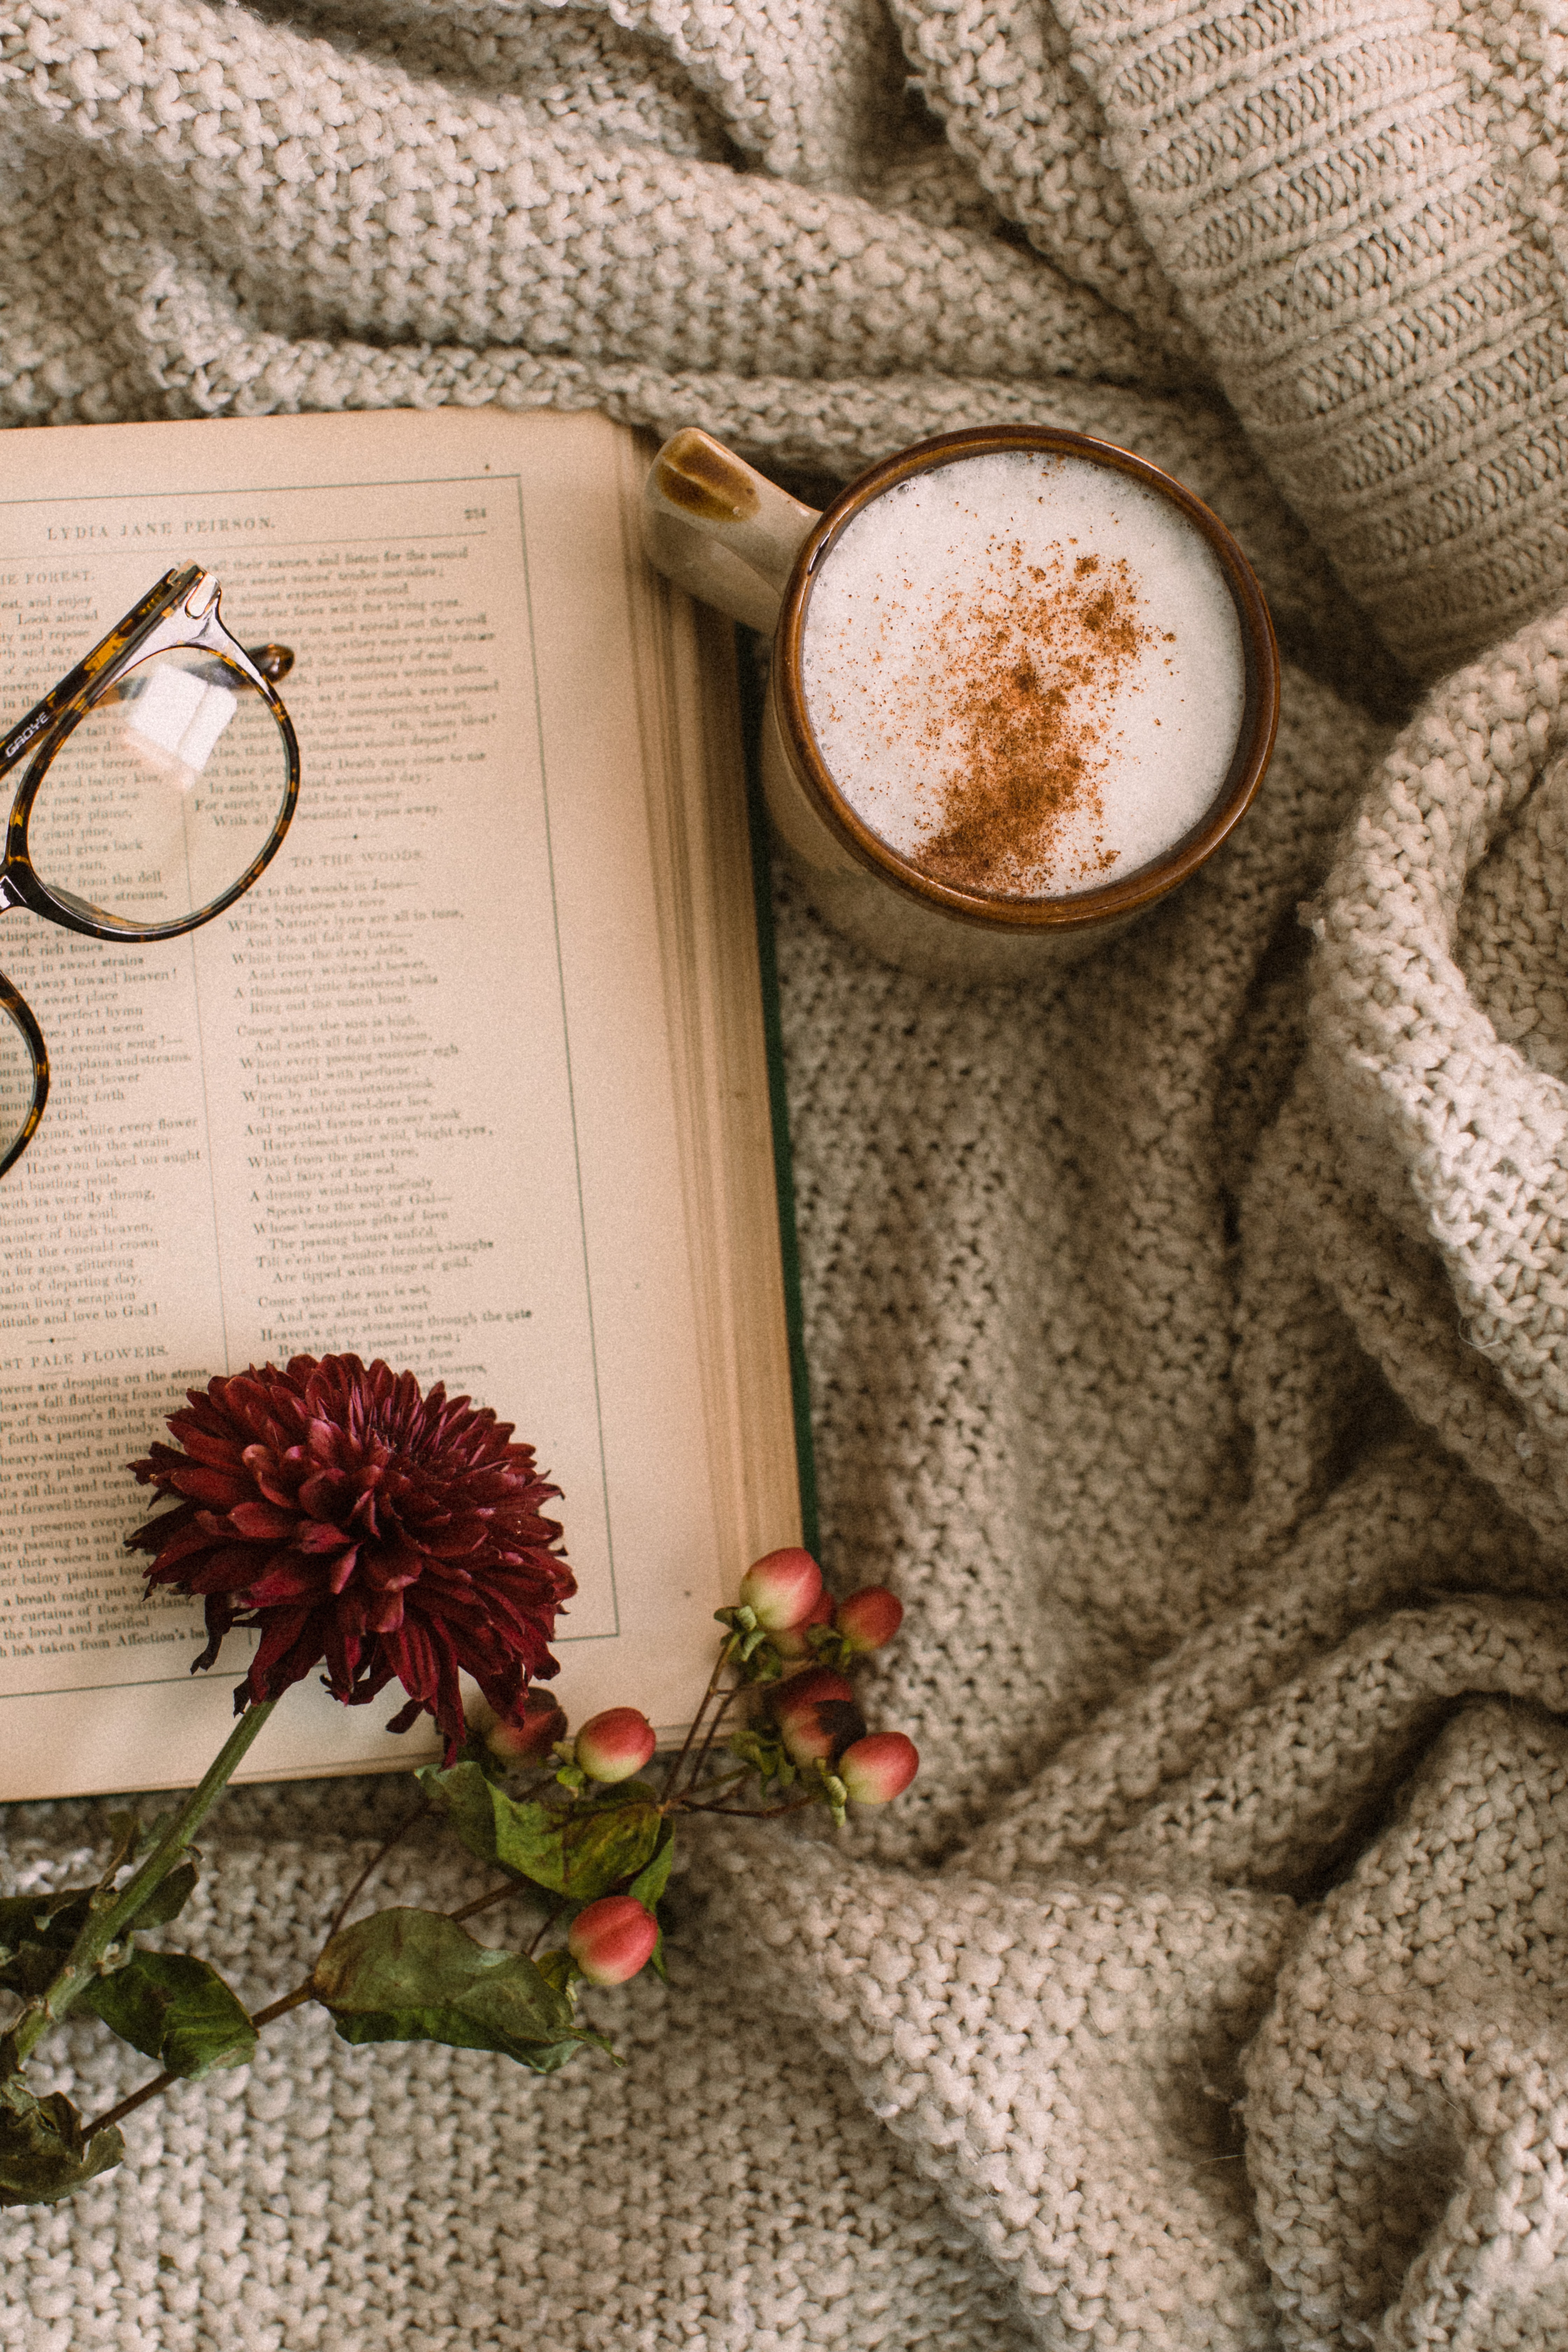 book, cup, food, spectacles, flowers, coffee, cappuccino, glasses, mug cellphone